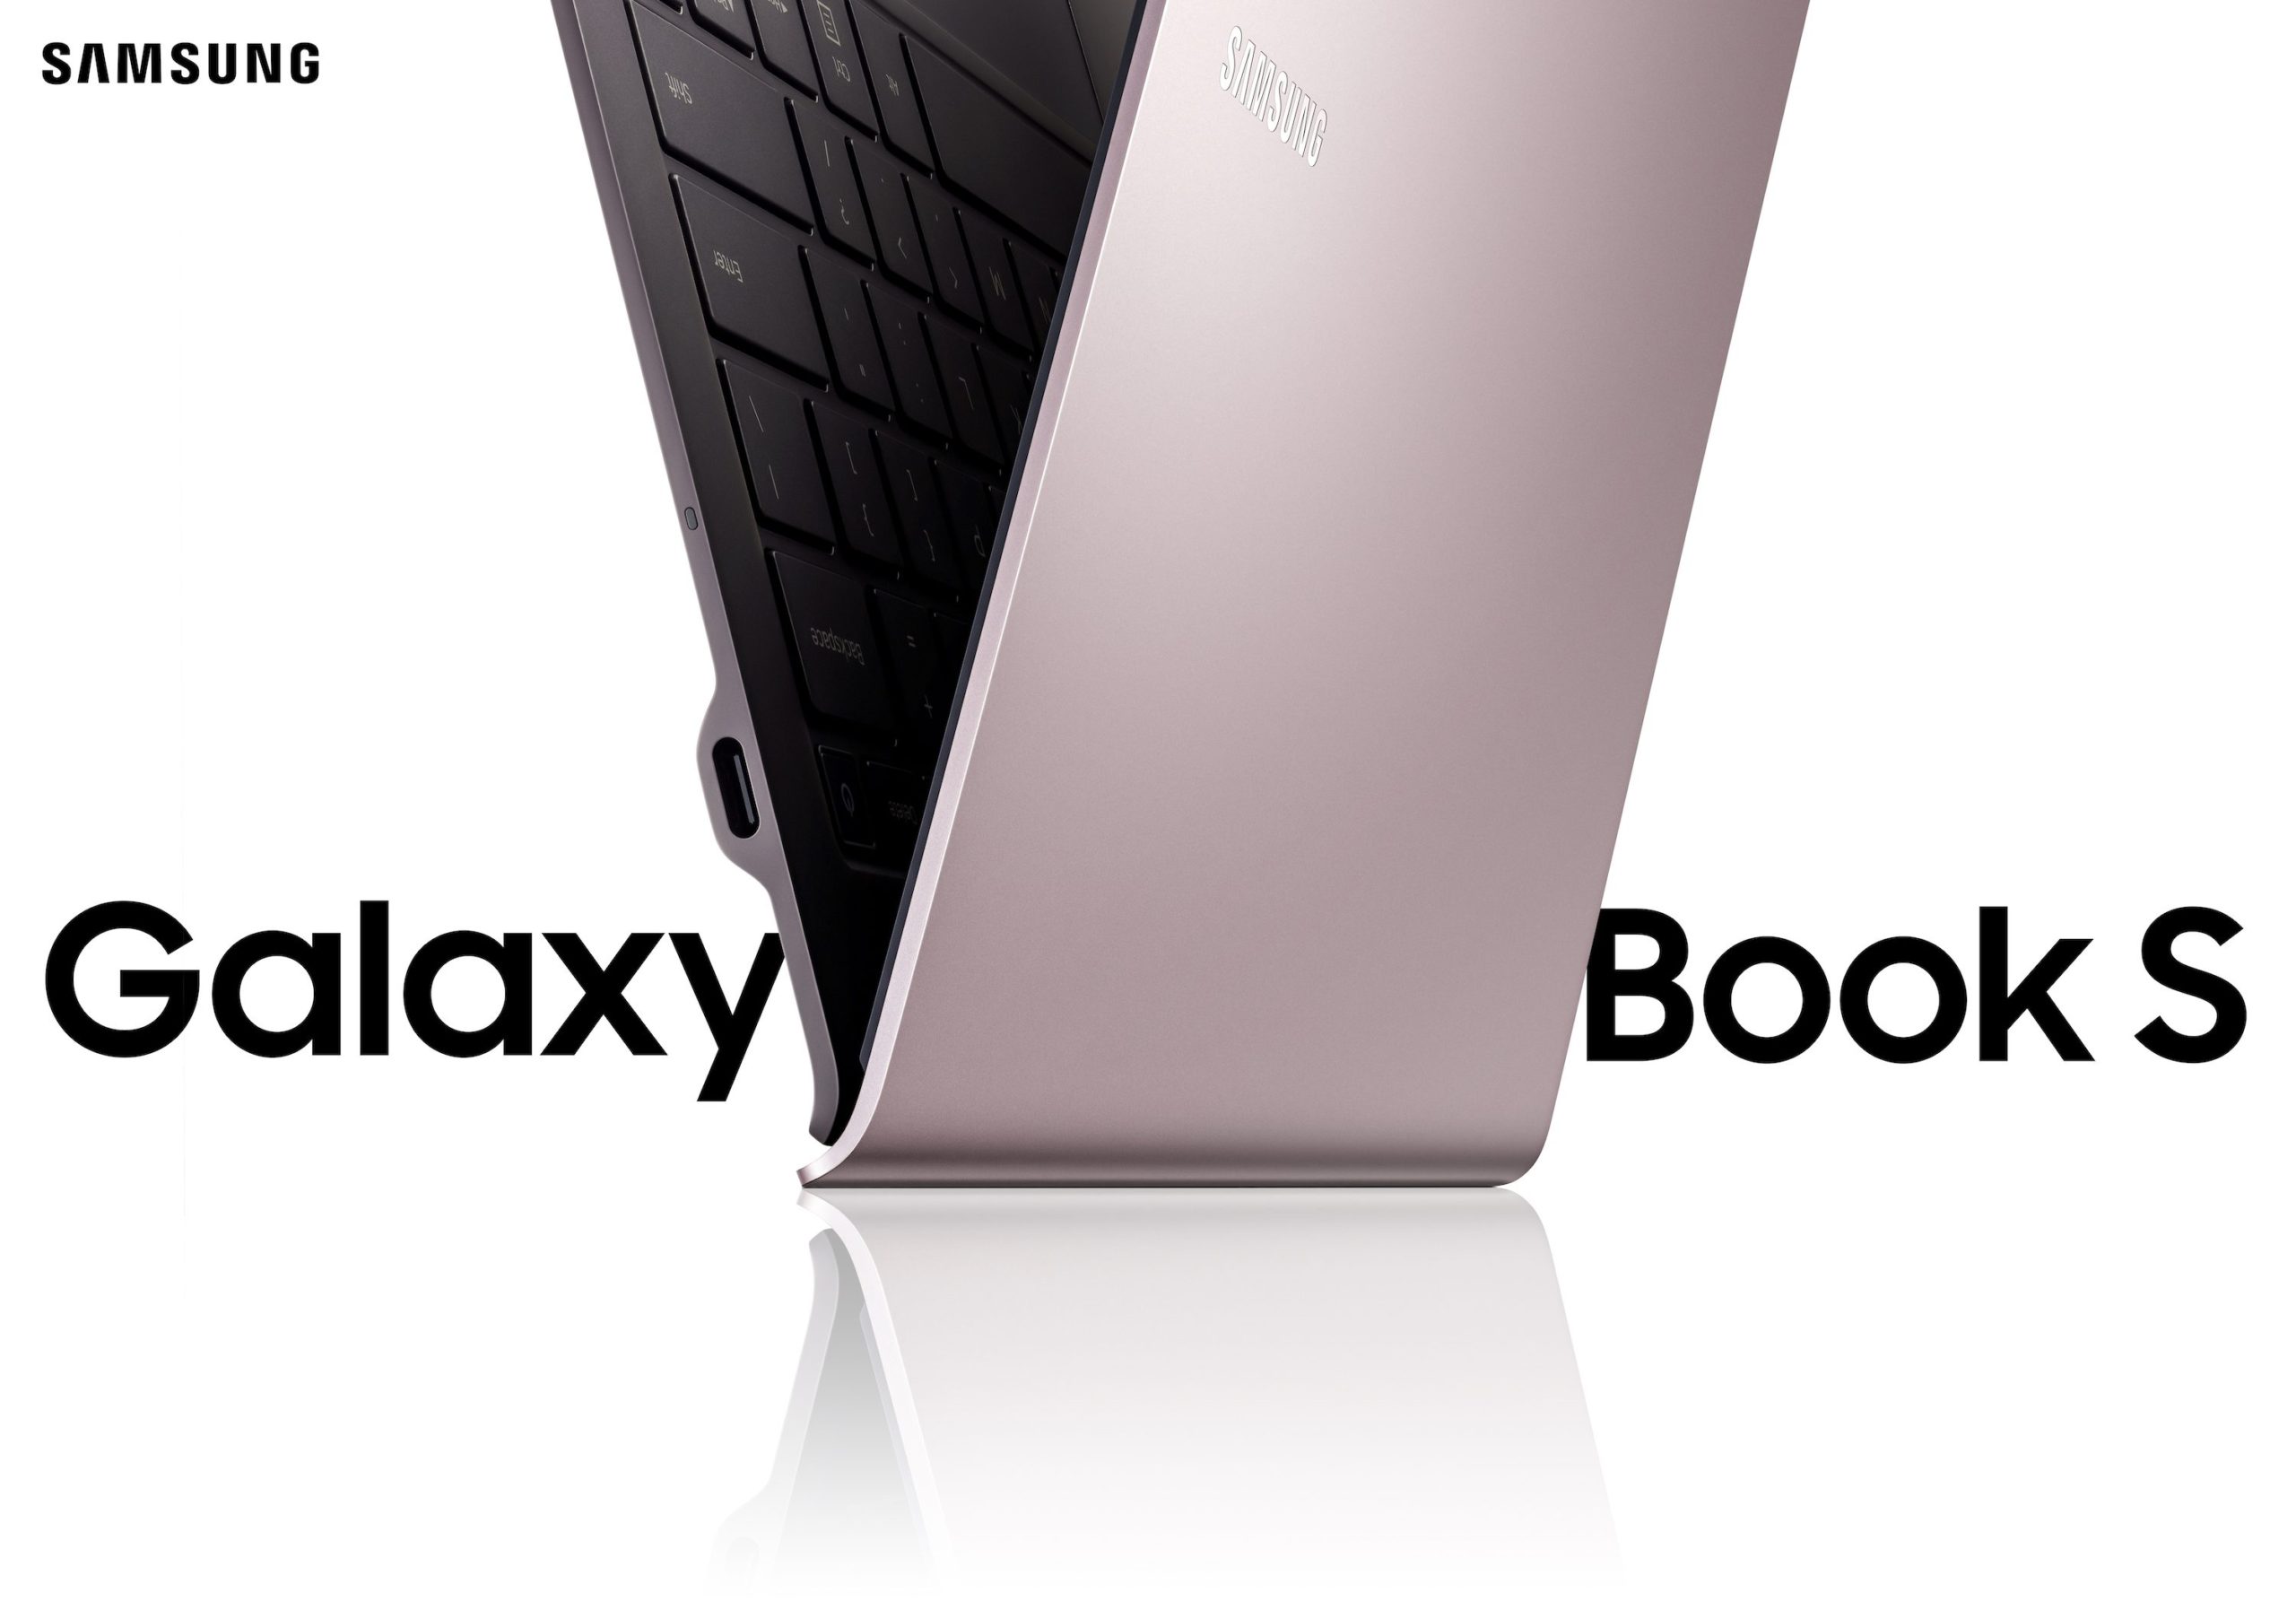 Experience Next-Generation Computing with Galaxy Book S, Now Available for Pre-Order